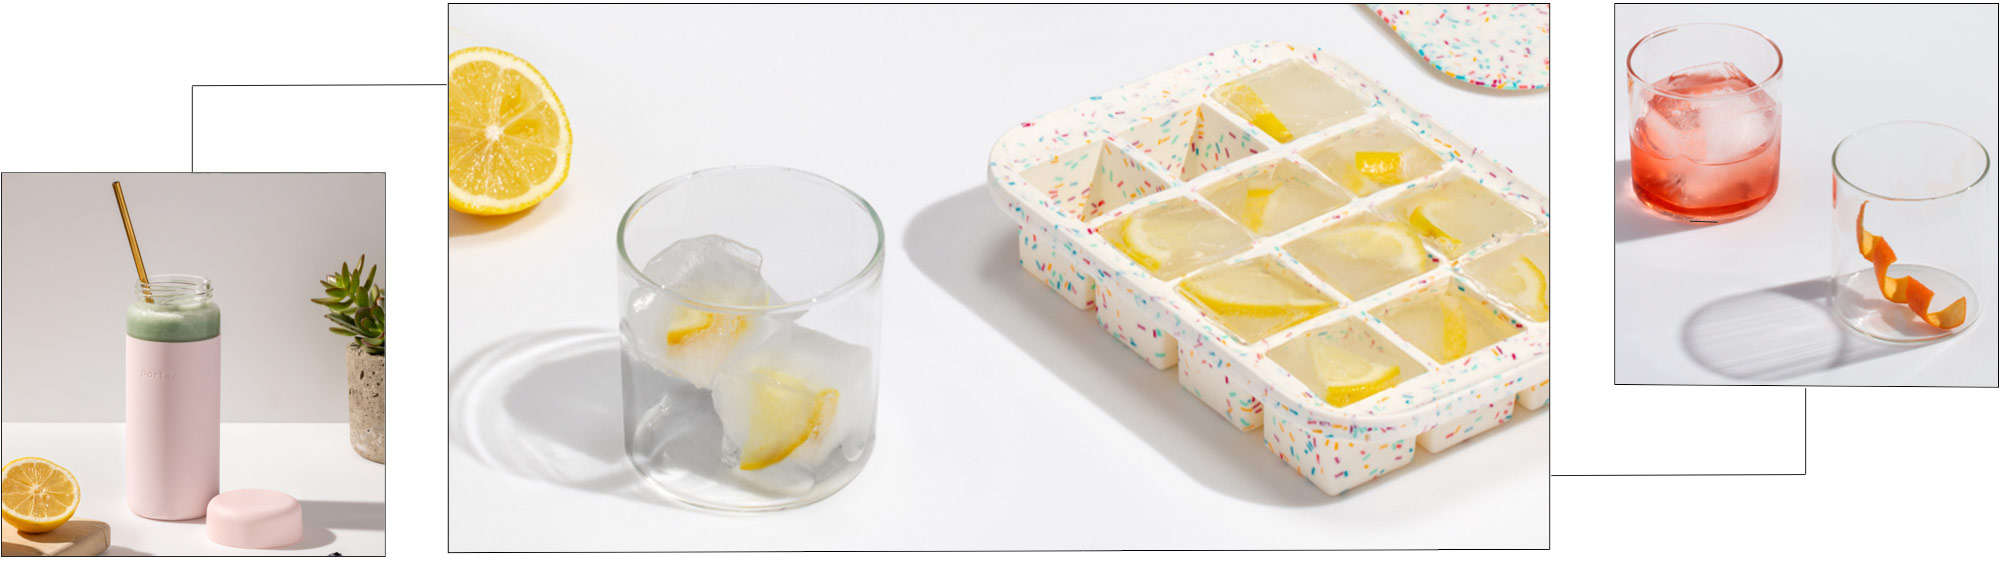 W & P Designs Peak XL Ice Cube Tray in Speckled Pink